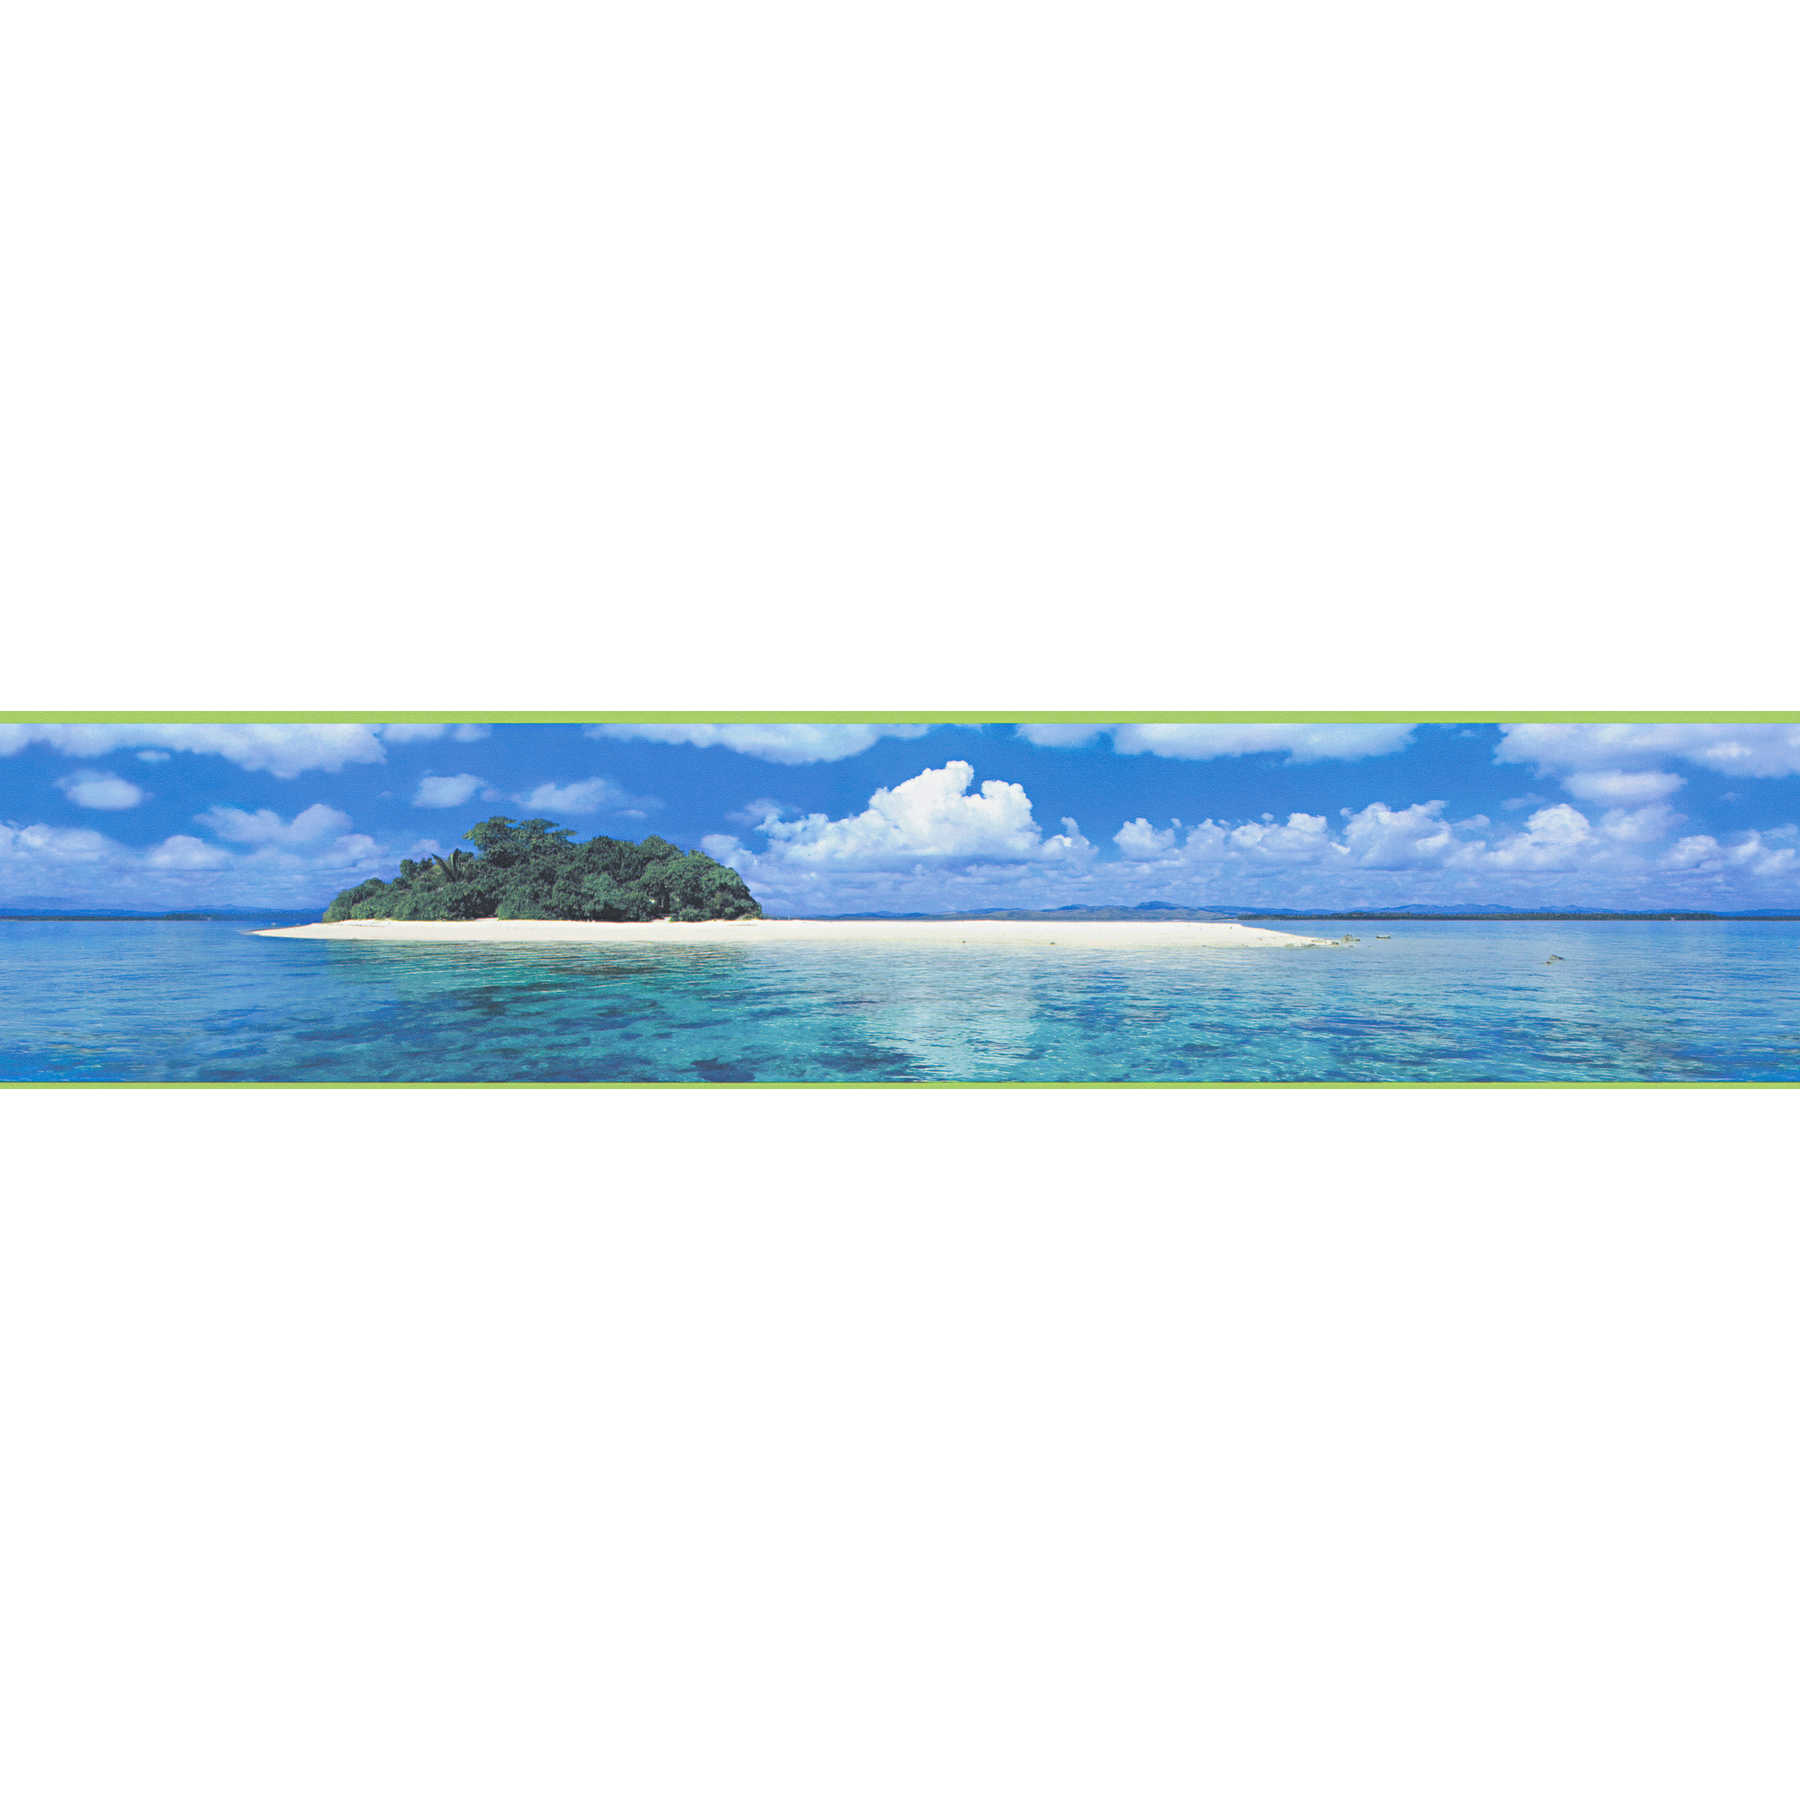         Self-adhesive wallpaper border with South Seas island landscape - Blue
    